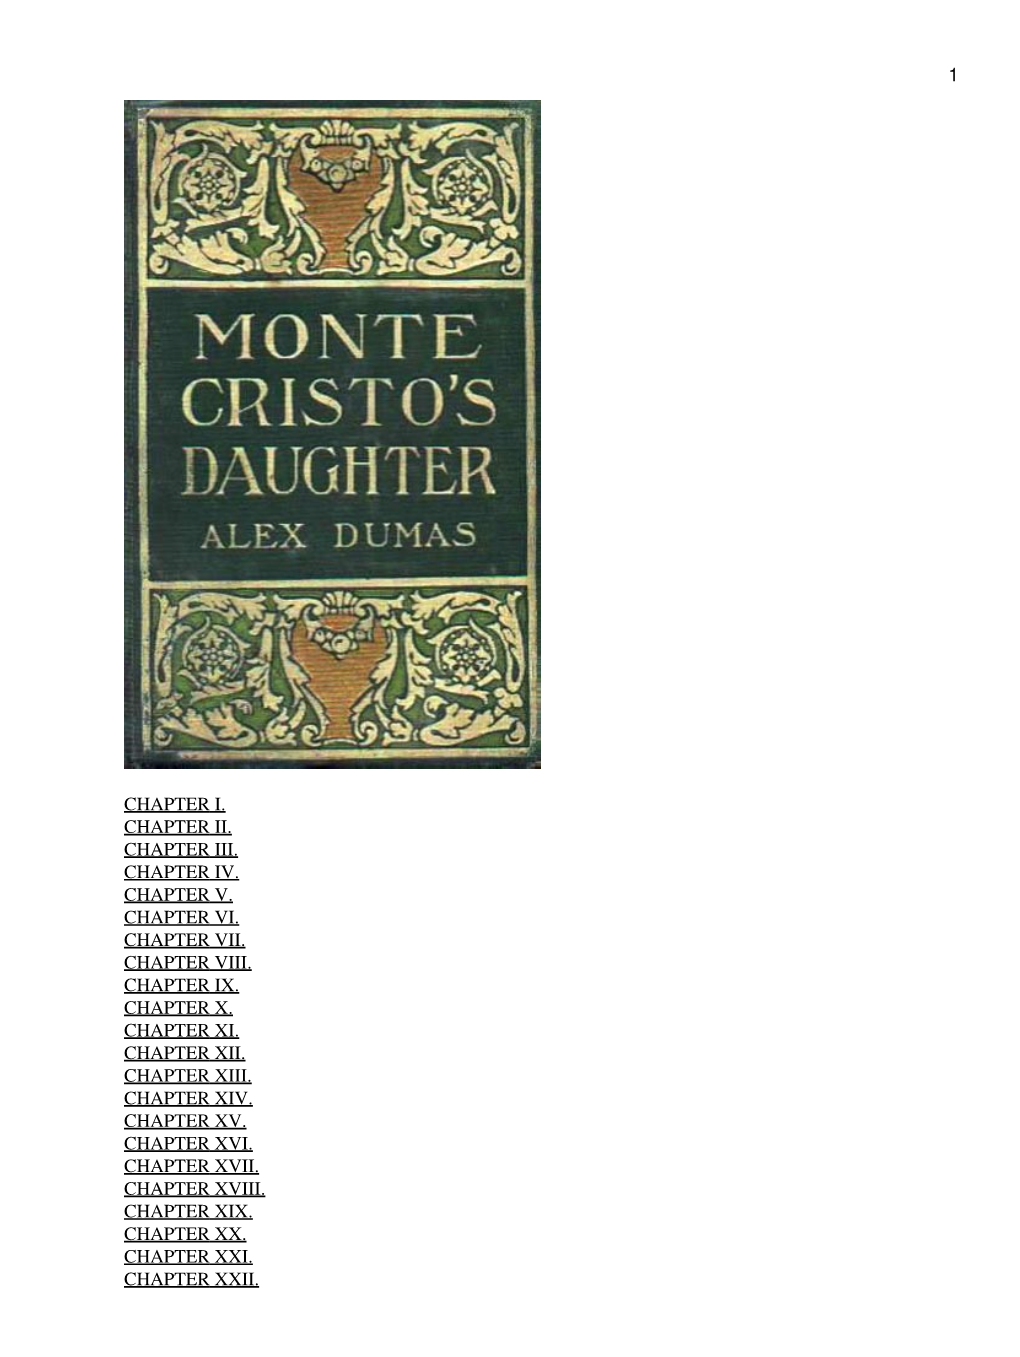 Monte-Cristo's Daughter, by Edmund Flagg 2 CHAPTER XXIII